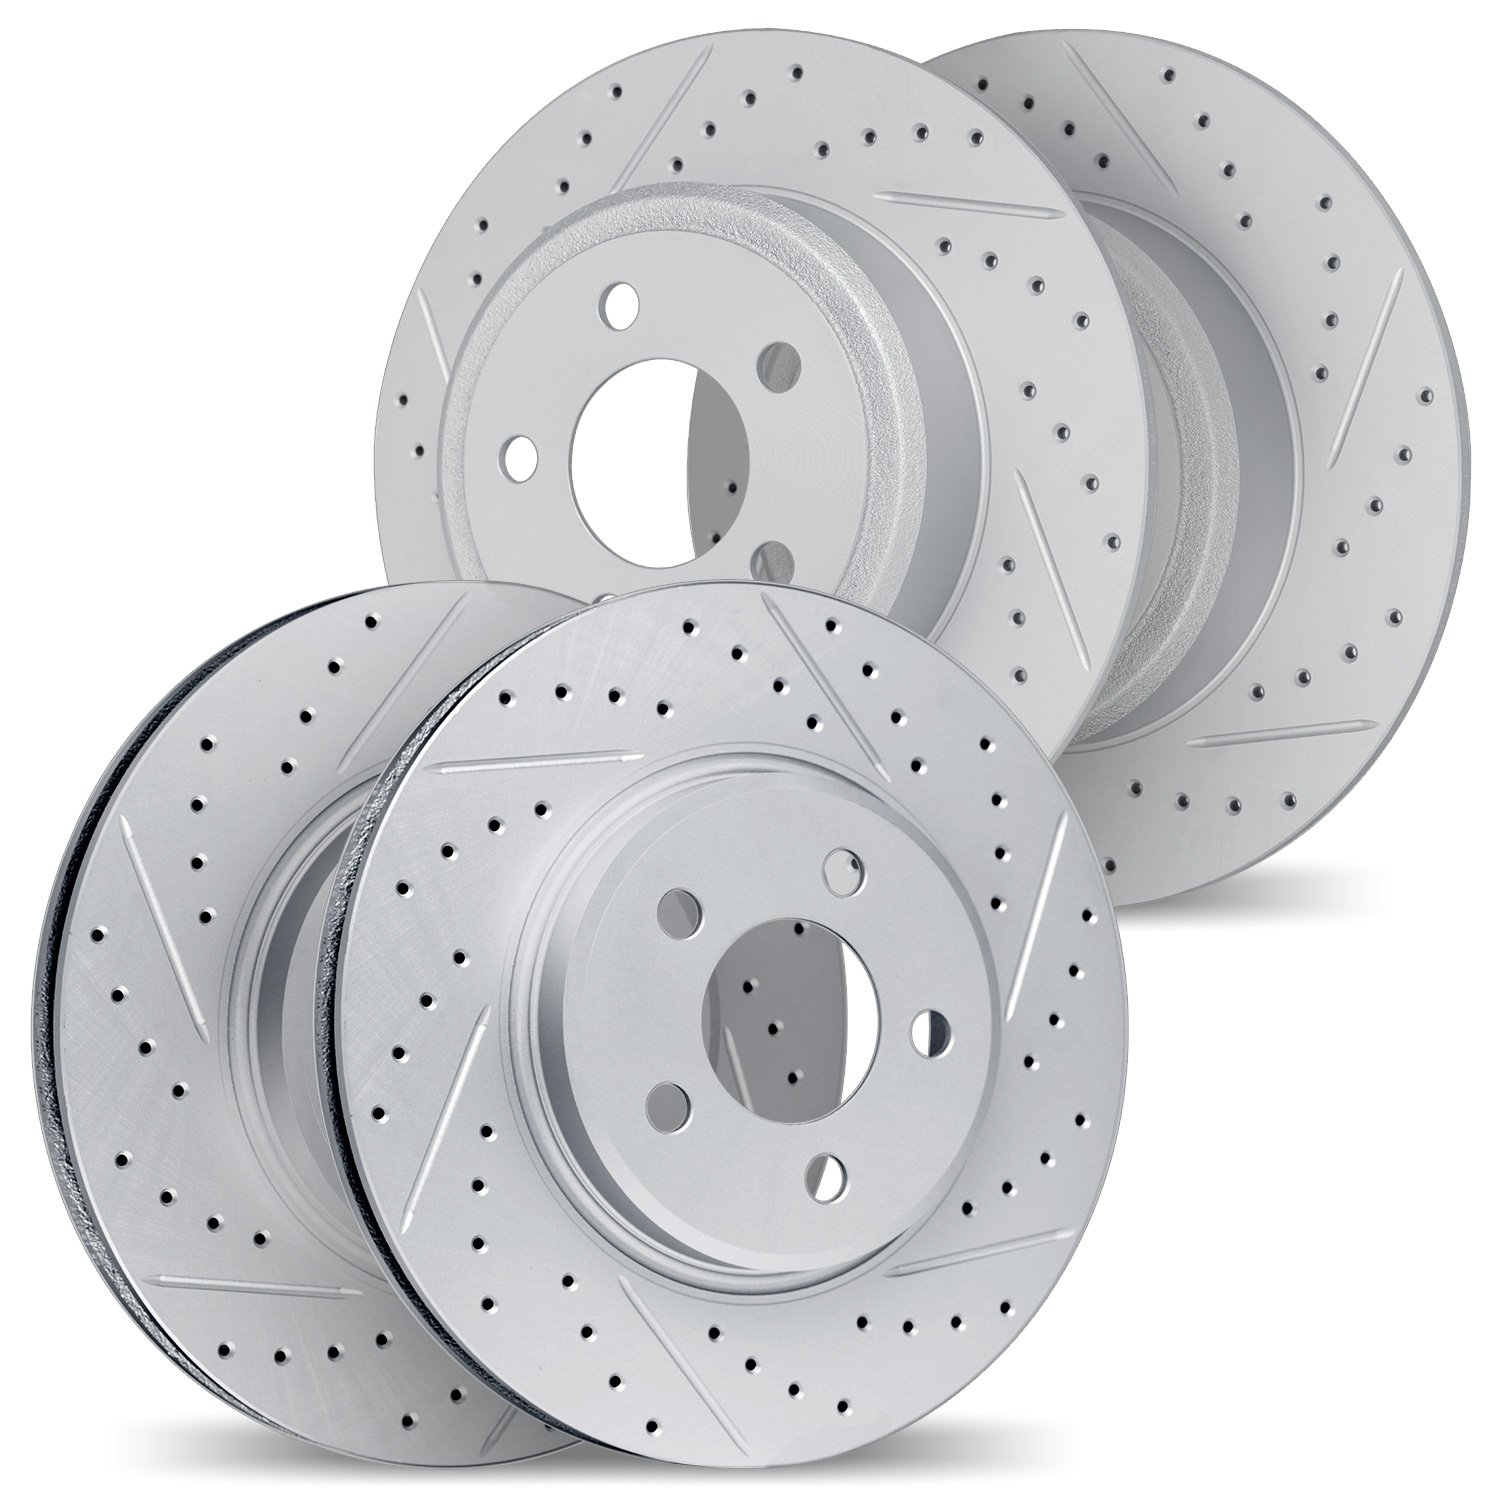 2004-63019 Geoperformance Drilled/Slotted Brake Rotors, 2017-2021 Mercedes-Benz, Position: Front and Rear